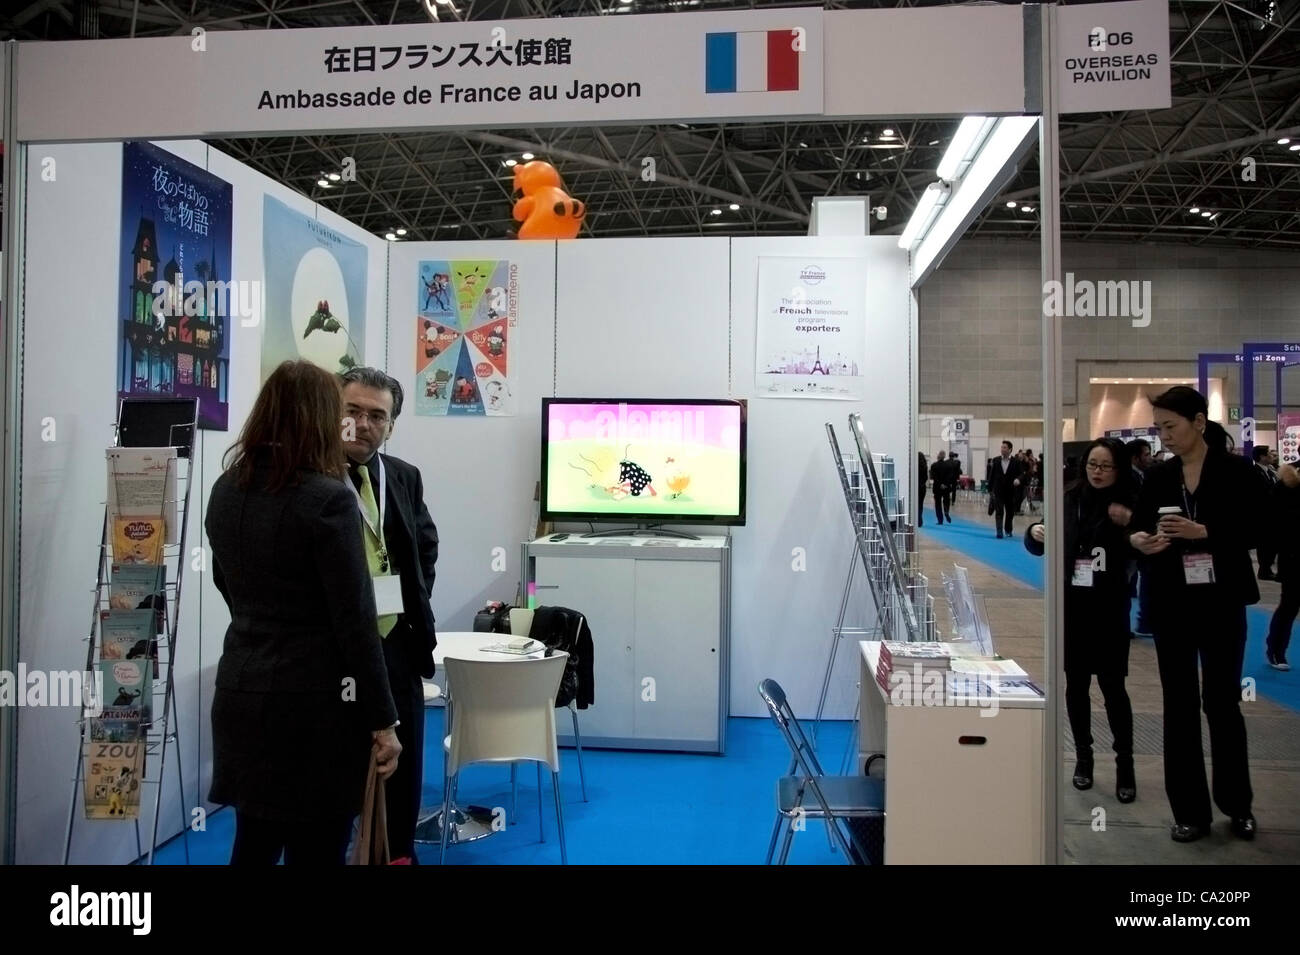 March 22, 2012, Tokyo, Japan - Staff of the Ambassade de France au Japan's pavilion at TAF. The fist business day of the Tokyo International Anime Fair (TAF) , 11th Anniversary. Stock Photo